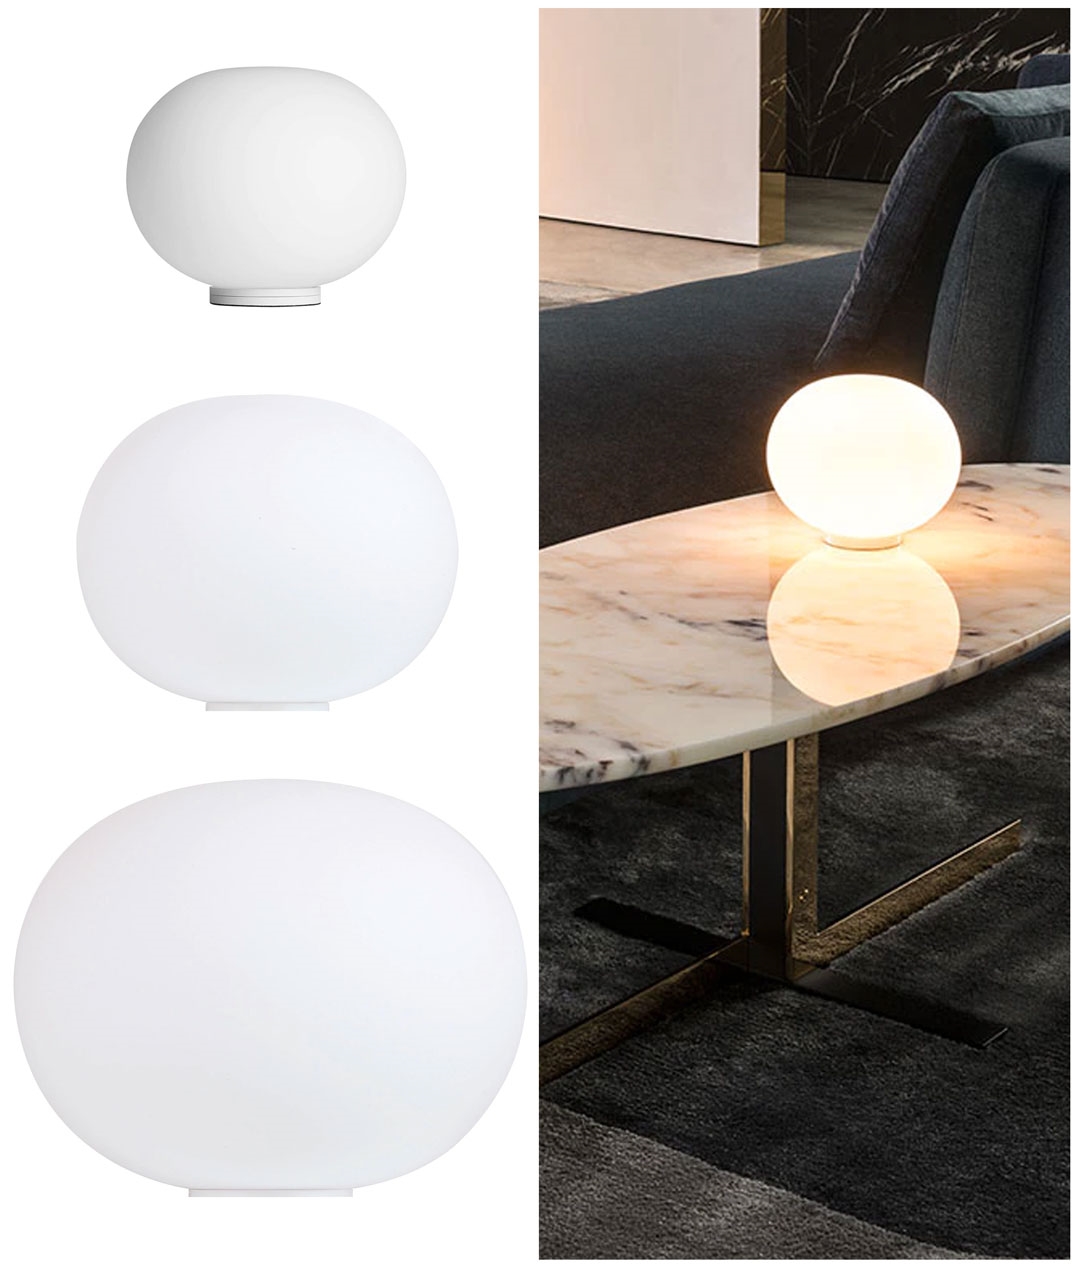 Dimmable Flos Glo Ball Designer Table Lamps, Looking For Table Lamps